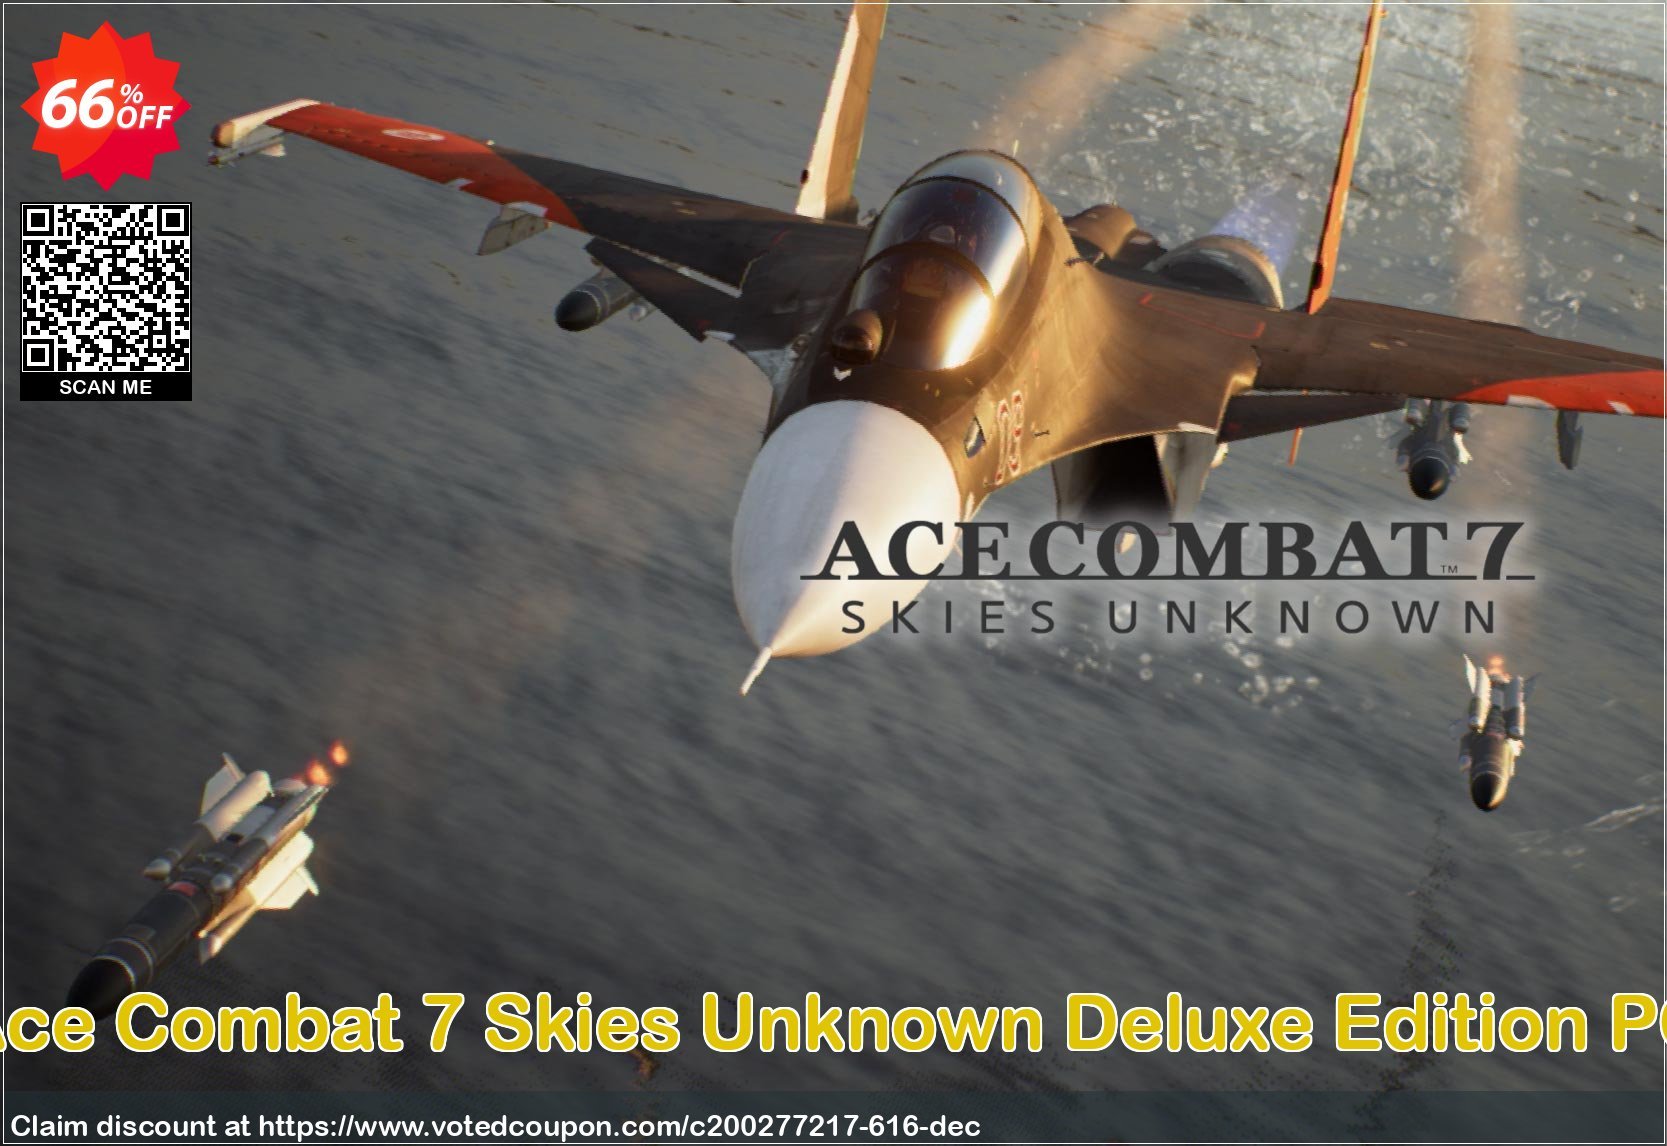 Ace Combat 7 Skies Unknown Deluxe Edition PC Coupon Code Apr 2024, 66% OFF - VotedCoupon